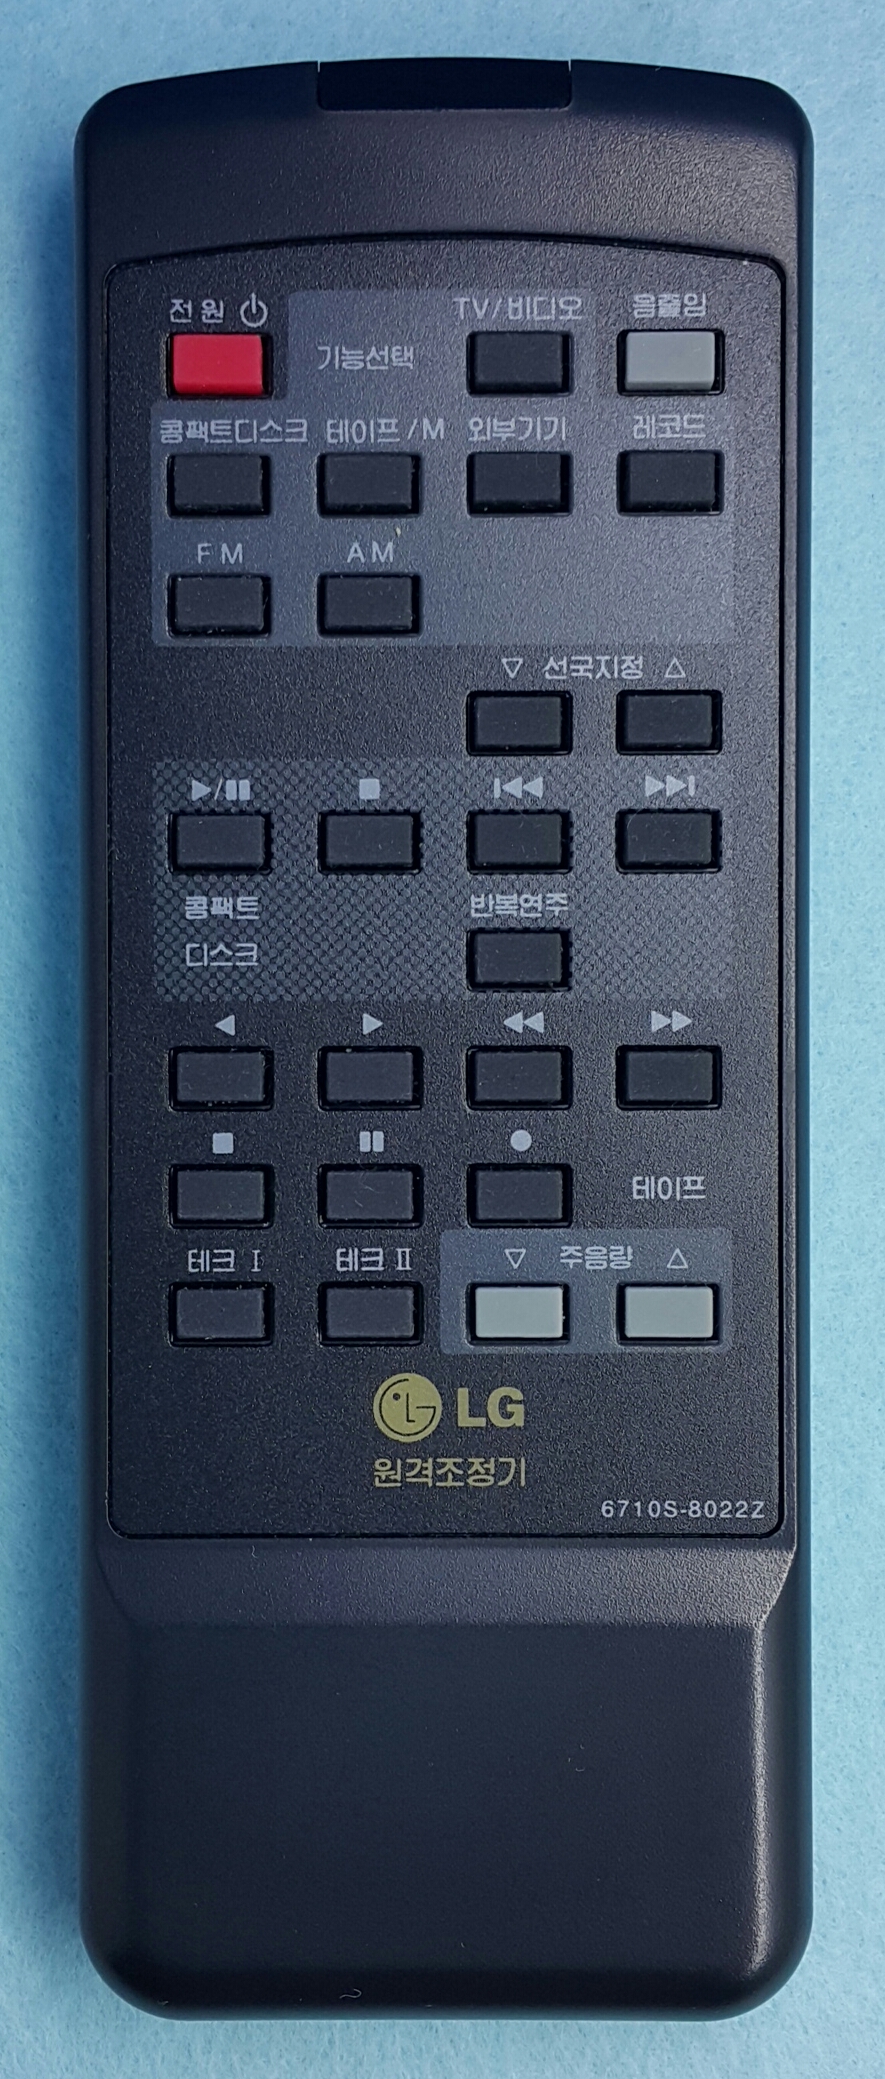 LG_6710S-8022Z_S0808 7887_AUDIO.LG_00001_cover.png